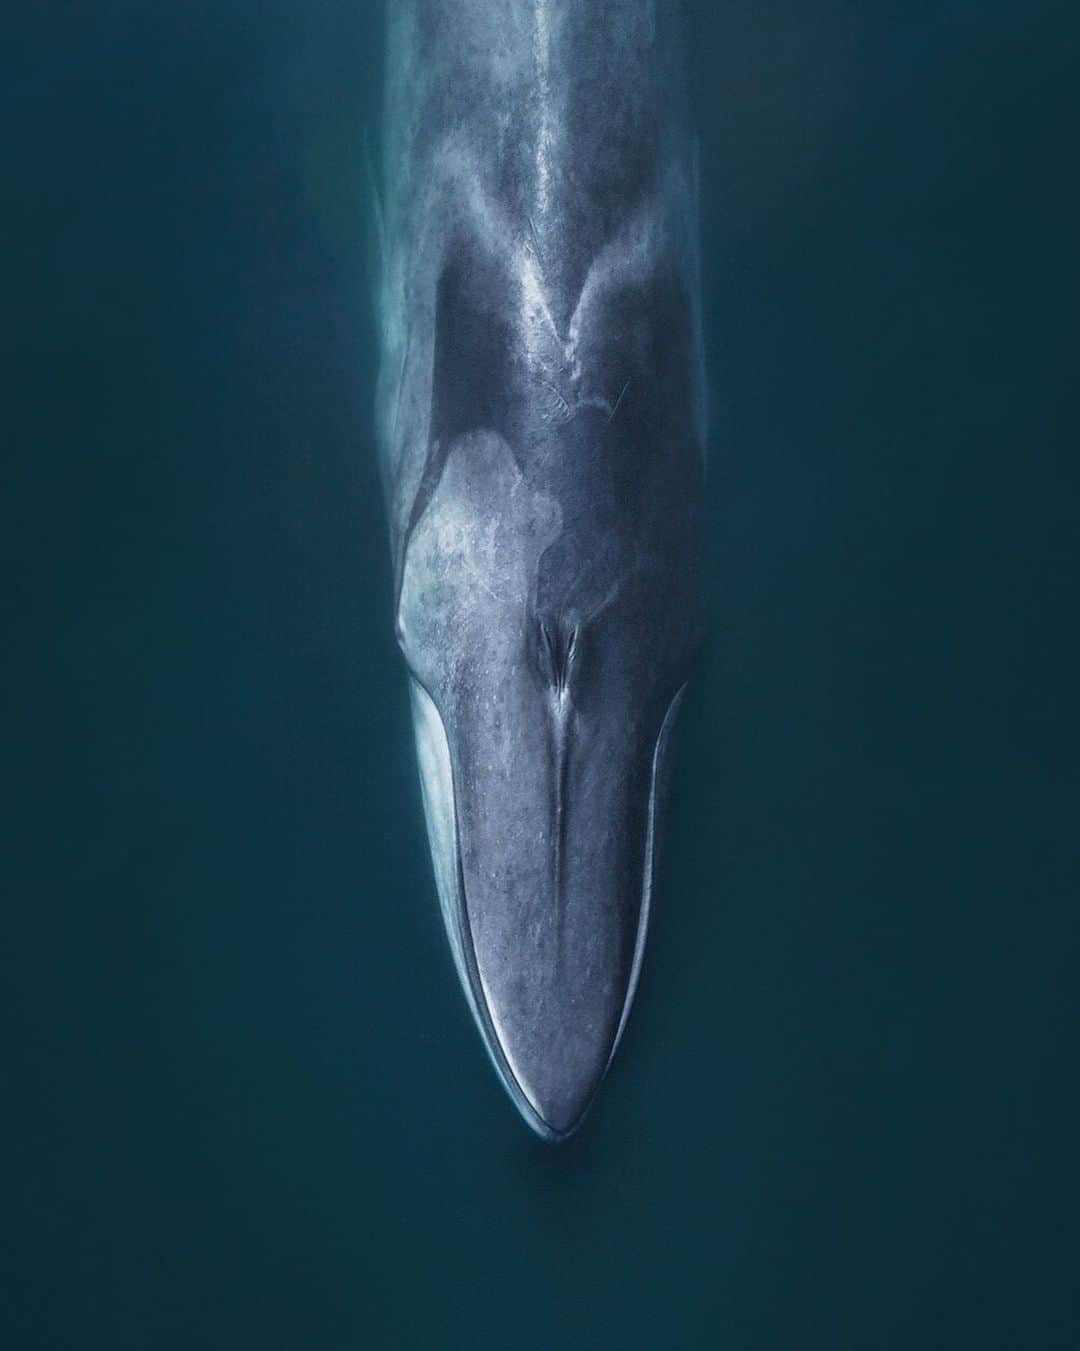 Chase Dekker Wild-Life Imagesのインスタグラム：「Fin whales have always been quite an elusive whale for me. I have spotted them many times in the high Arctic, from a floatplane in Alaska, up in Iceland, down in Baja, and across the California coast. However, since they rarely do anything but swim fast and disappear faster, my camera had nothing to show for all those sightings. Last autumn in Monterey Bay, we had a large surge of fin and blue whales, with the fins actually outnumbering the blues. This was quite surprising as we generally see many more blue whales, but it finally provided the opportunity to photograph the second largest animal on the planet (blue whale being the largest). What really distinguishes the fin whale from all other mammals, is that they are the only asymmetrical colored mammal on the planet, as their lower right jaw is white and the left is grey. No one quite understands the reasoning for this, but it is one easy way to identify them, if of course you can catch a decent glimpse of the “greyhound of the sea”.」